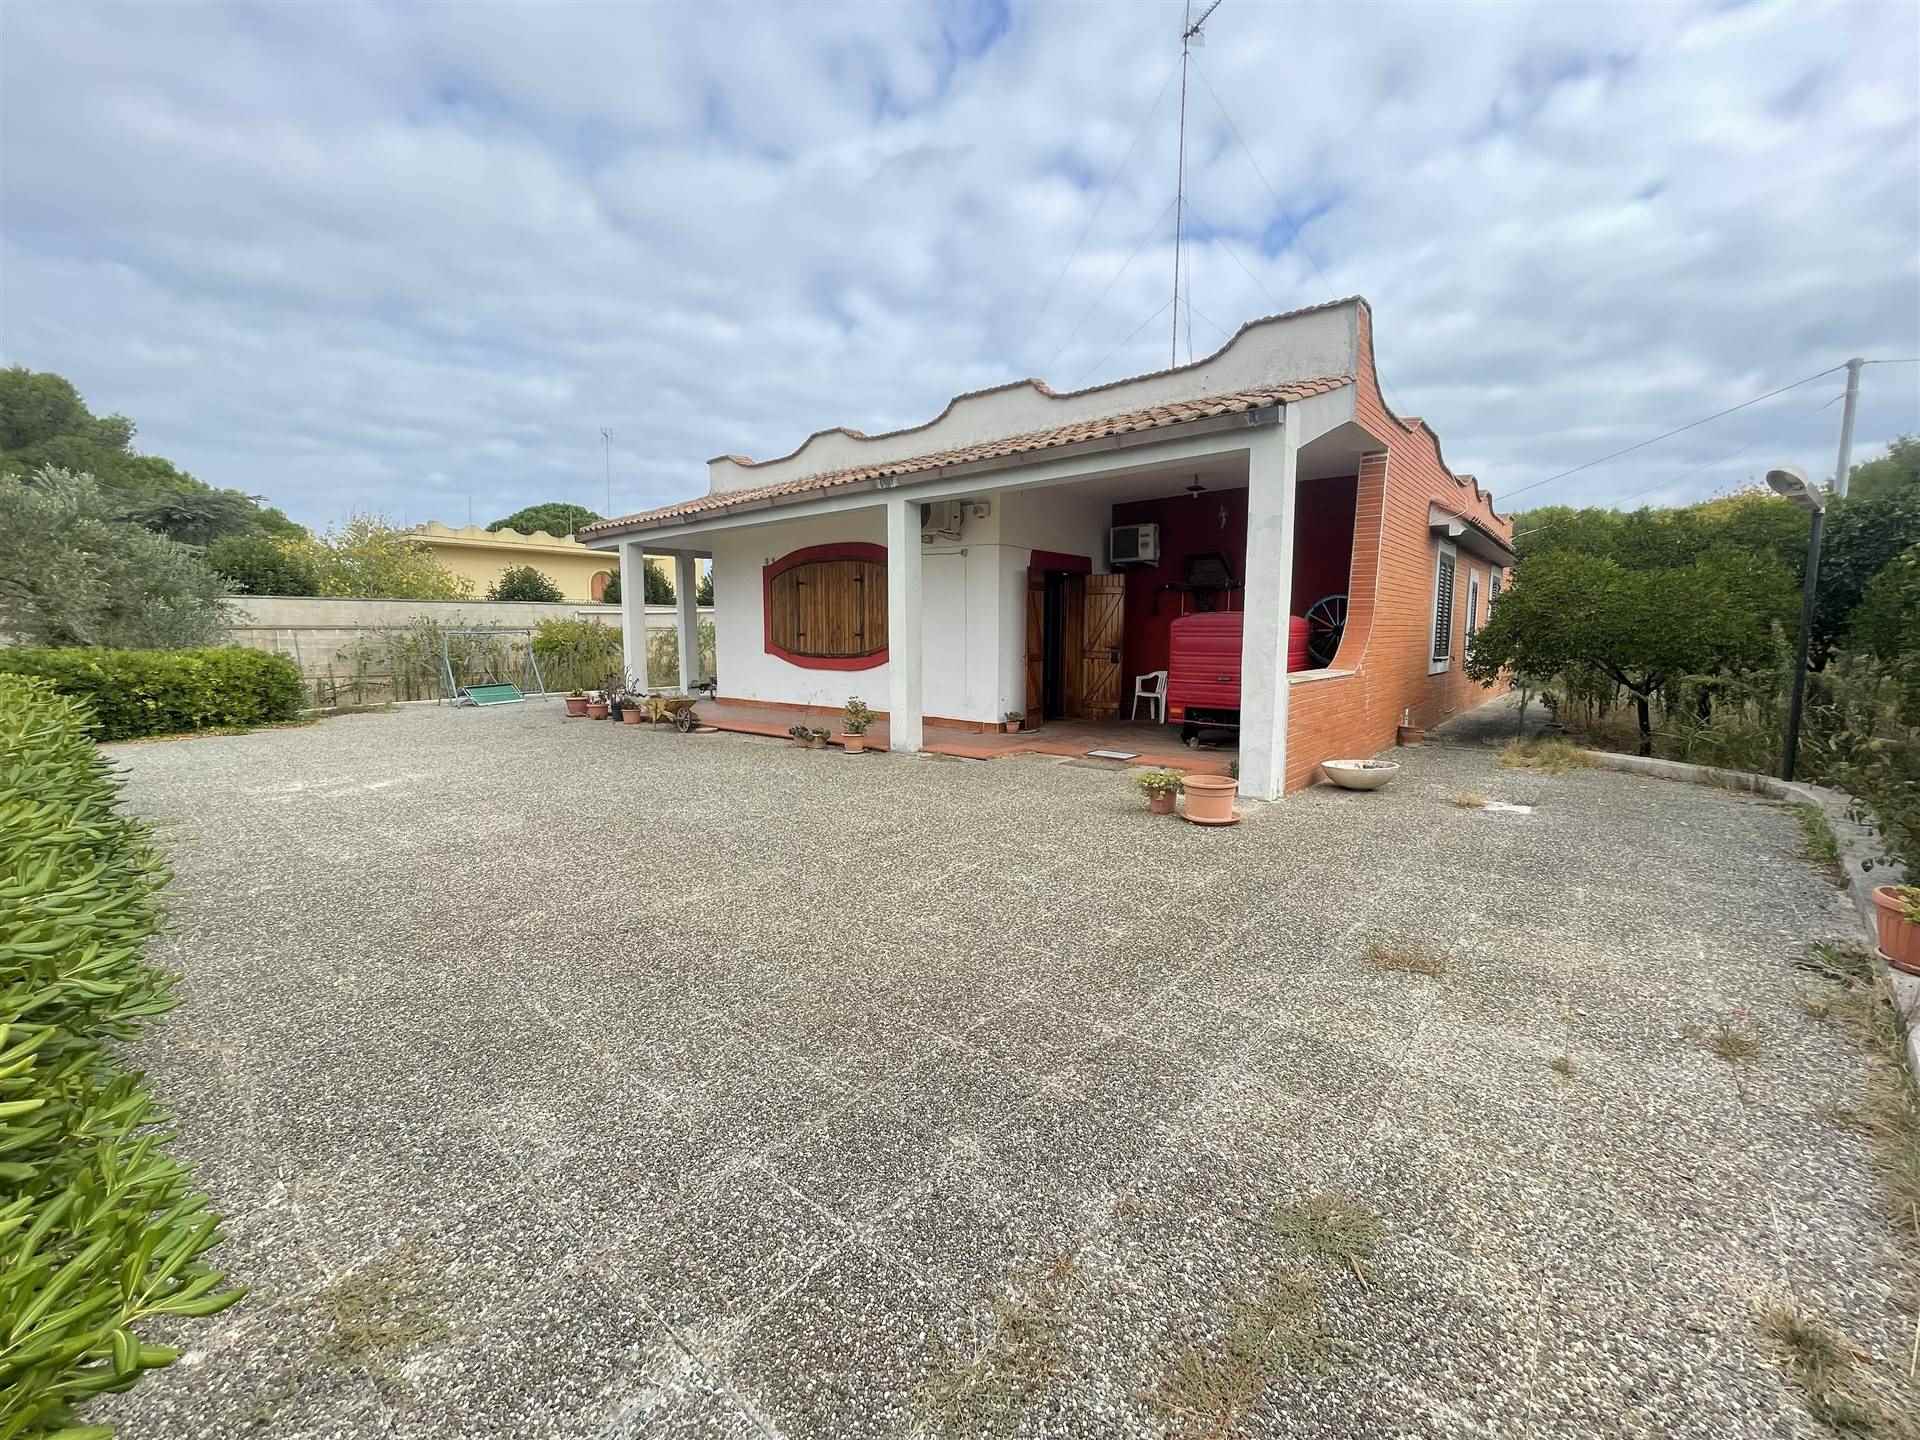 SAN CATALDO, LECCE, Villa for sale of 150 Sq. mt., Heating Individual heating system, Energetic class: G, Epi: 247,63 kwh/m2 year, placed at Ground, 